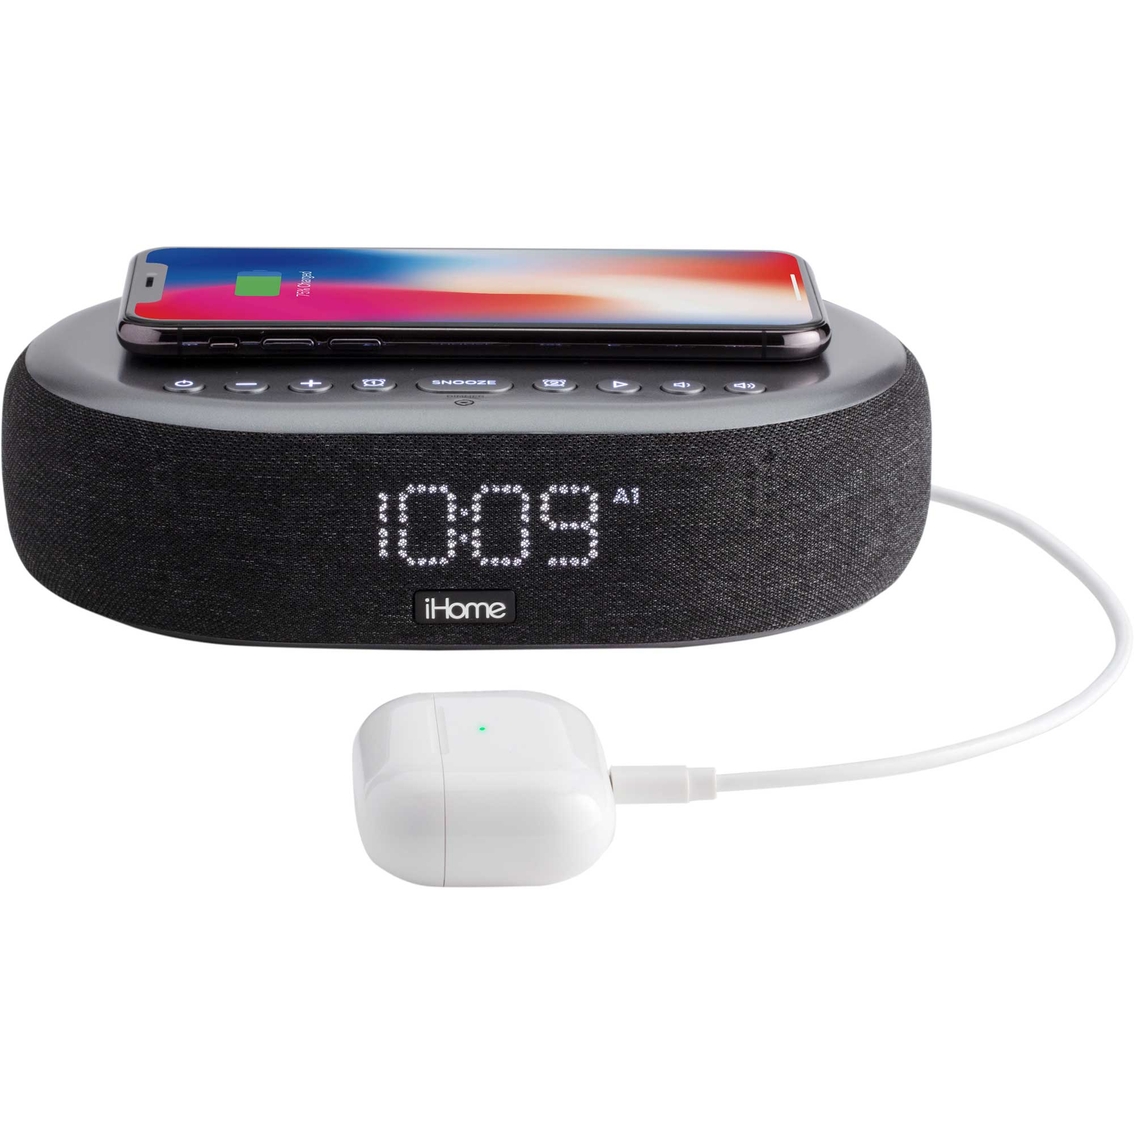 iHome TimeBoost Bluetooth Stereo Alarm Clock with Speakerphone and USB Charging - Image 7 of 10